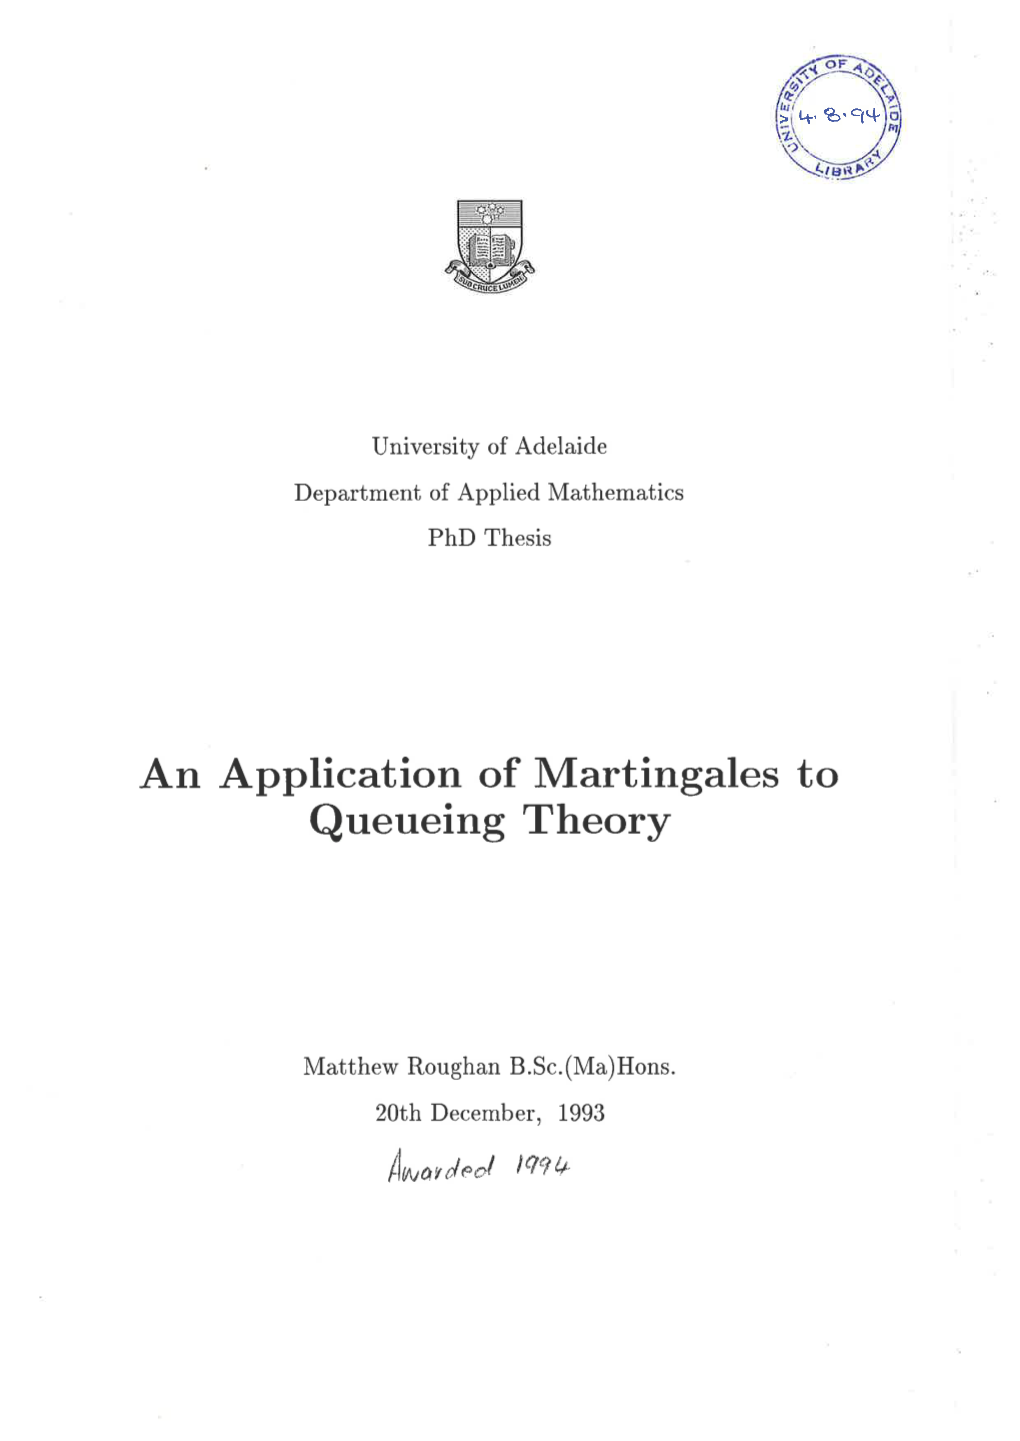 An Application of Martingales to Queueing Theory